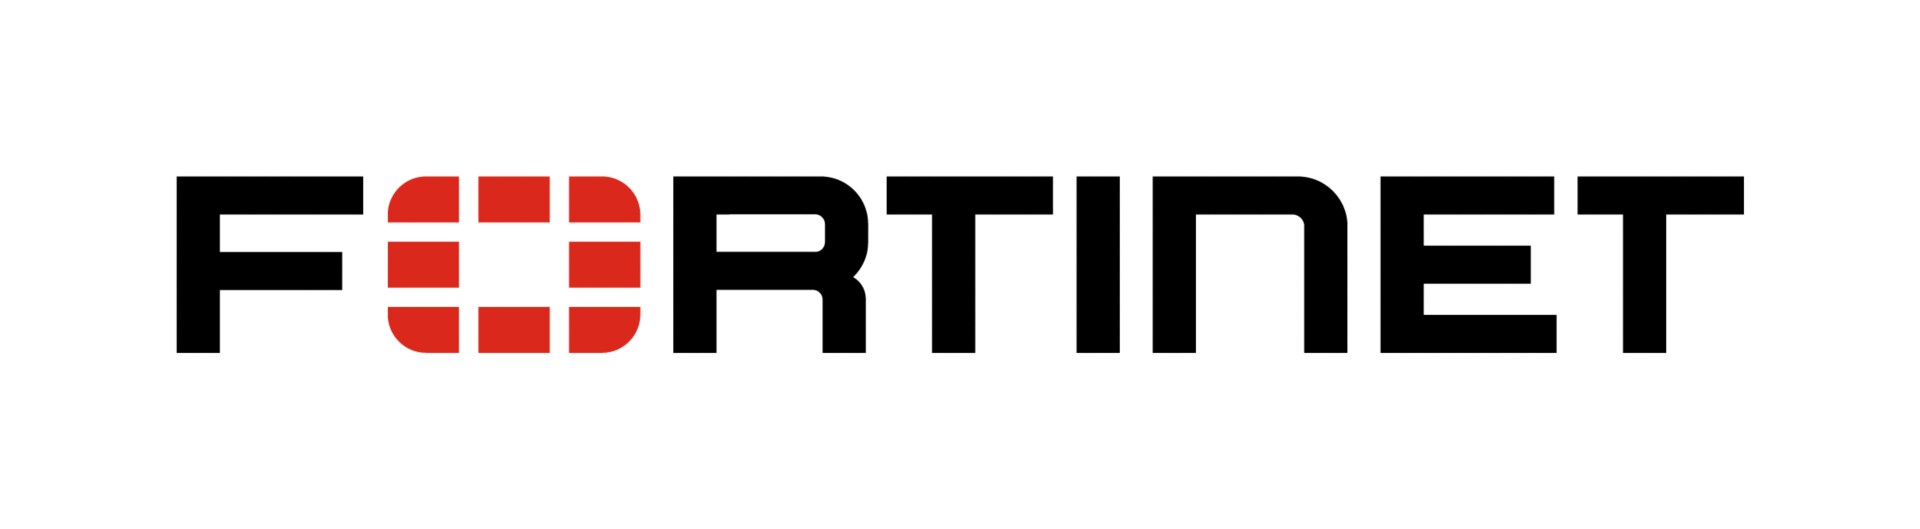 Fortinet FortiCare Best Practice Services - technical support - 5 years